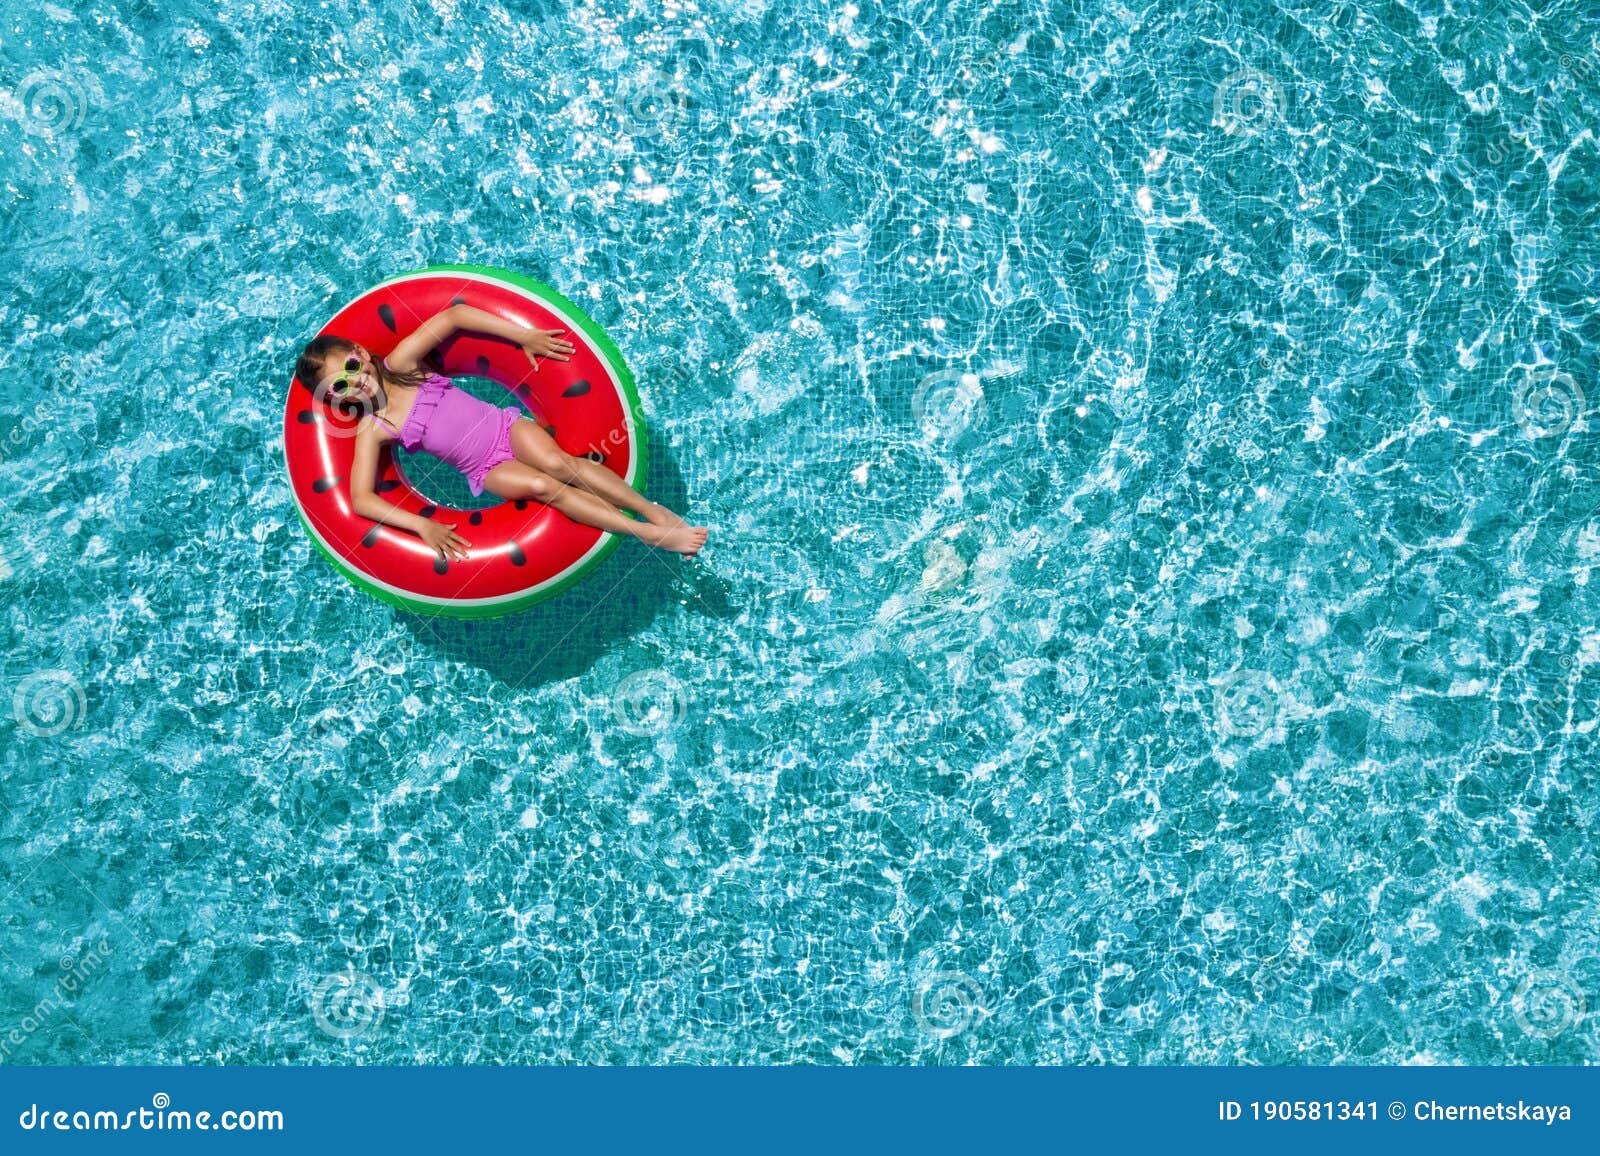 Cute Little Girl with Inflatable Ring in Swimming Pool. Space for Text ...